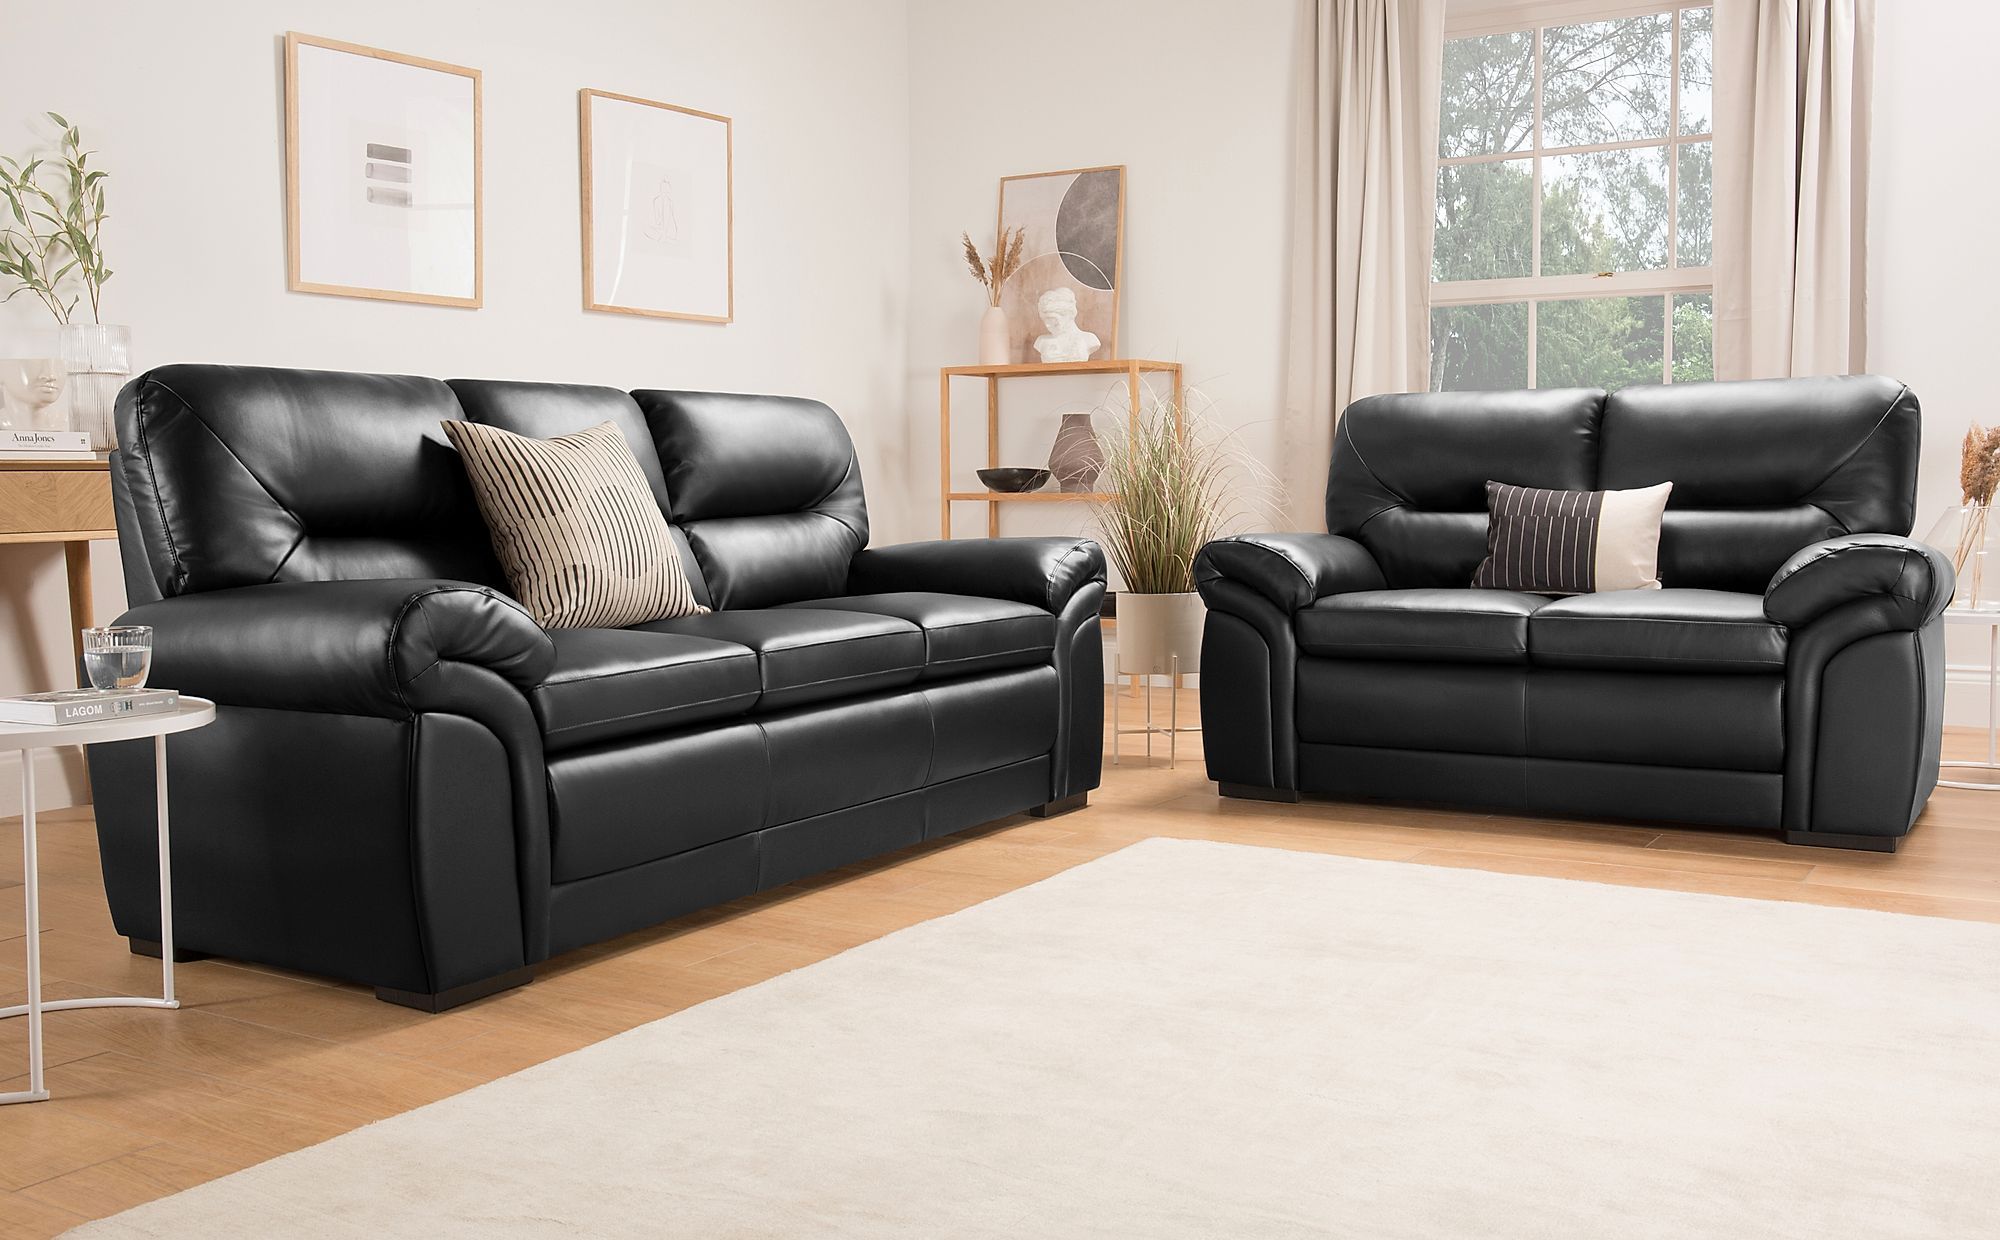 Bromley Black Leather 3+2 Seater Sofa Set | Furniture Choice In Sofas In Black (Gallery 11 of 20)